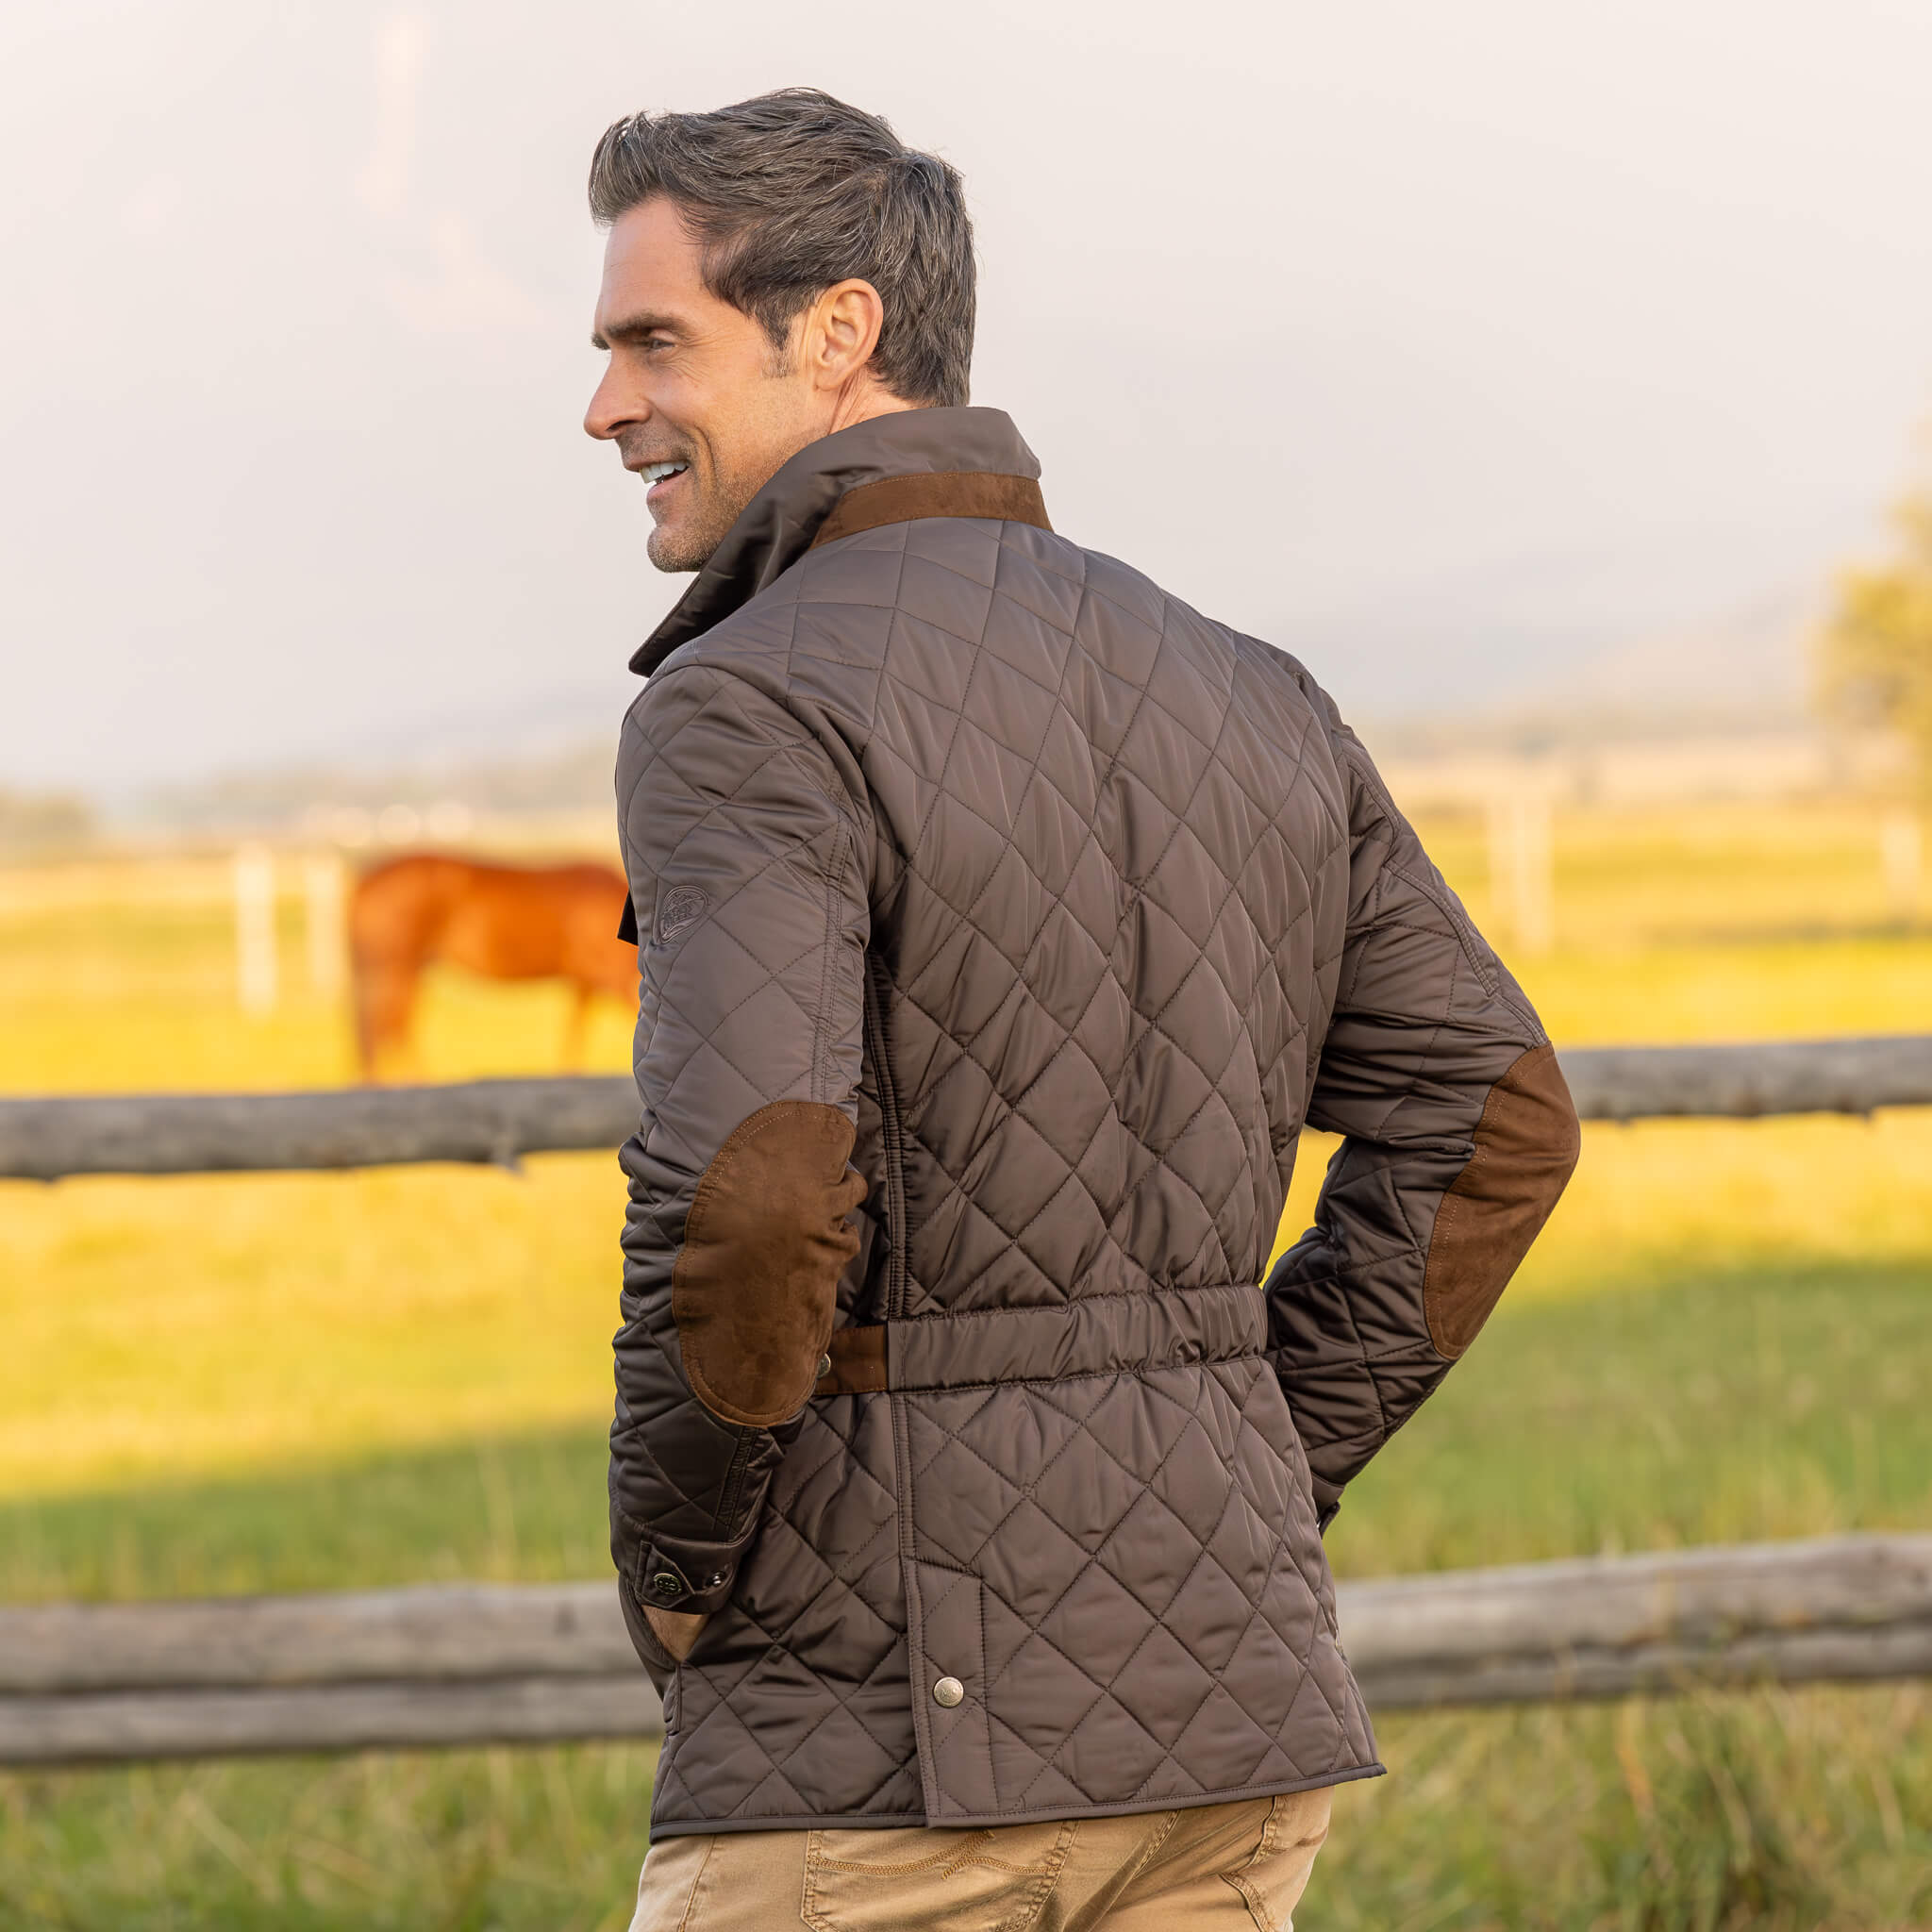 Adventurer Diamond Quilted Nylon Jacket - Madison Creek Outfitters